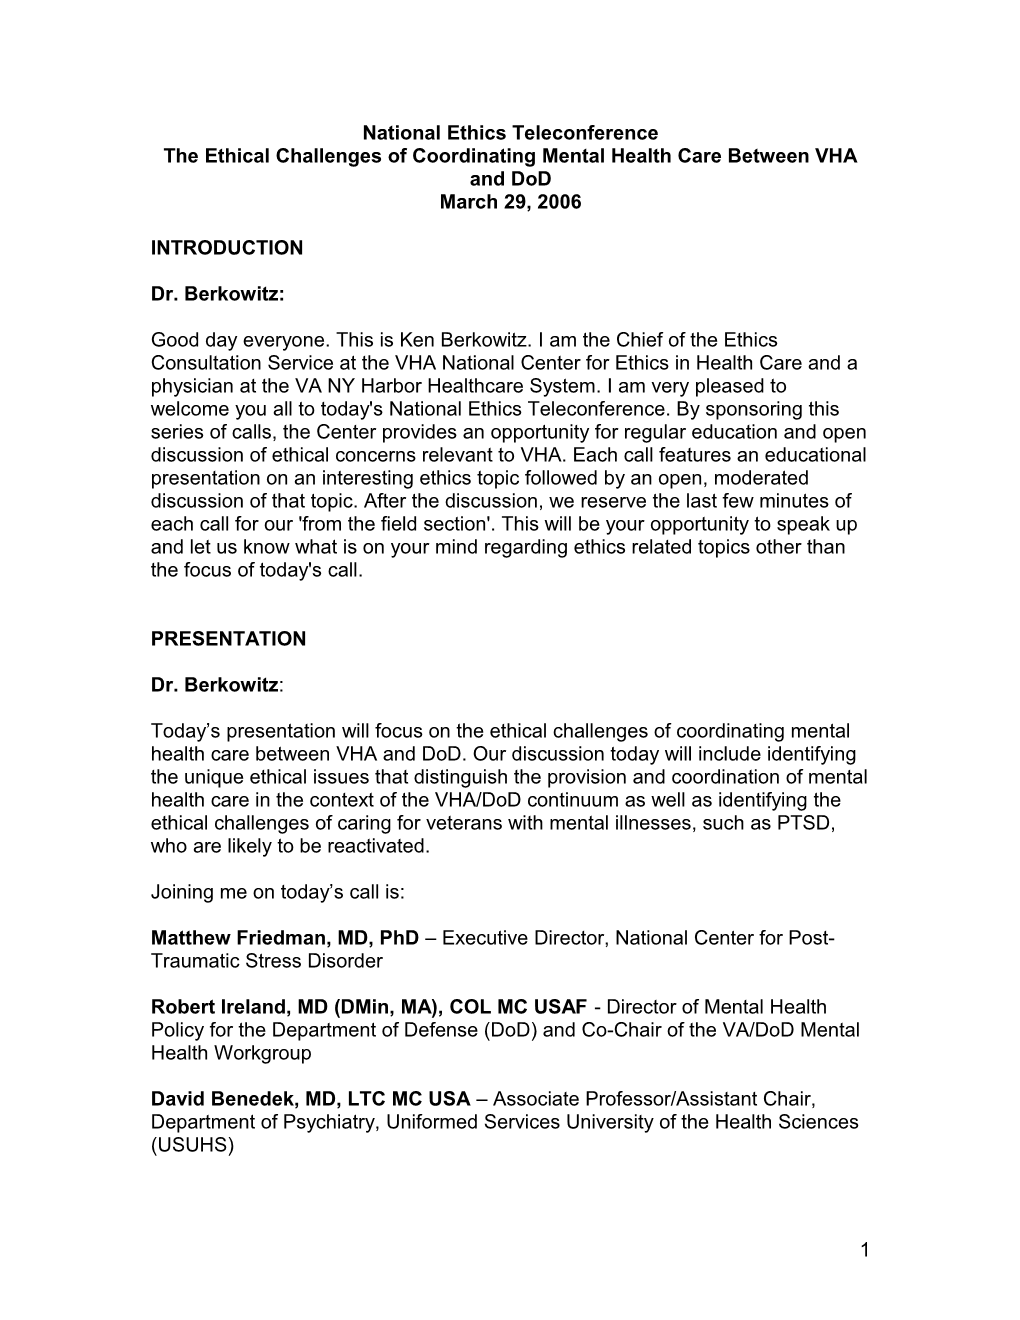 The Ethical Challenges of Coordinating Mental Health Care Between VHA and Dod - U.S. Department